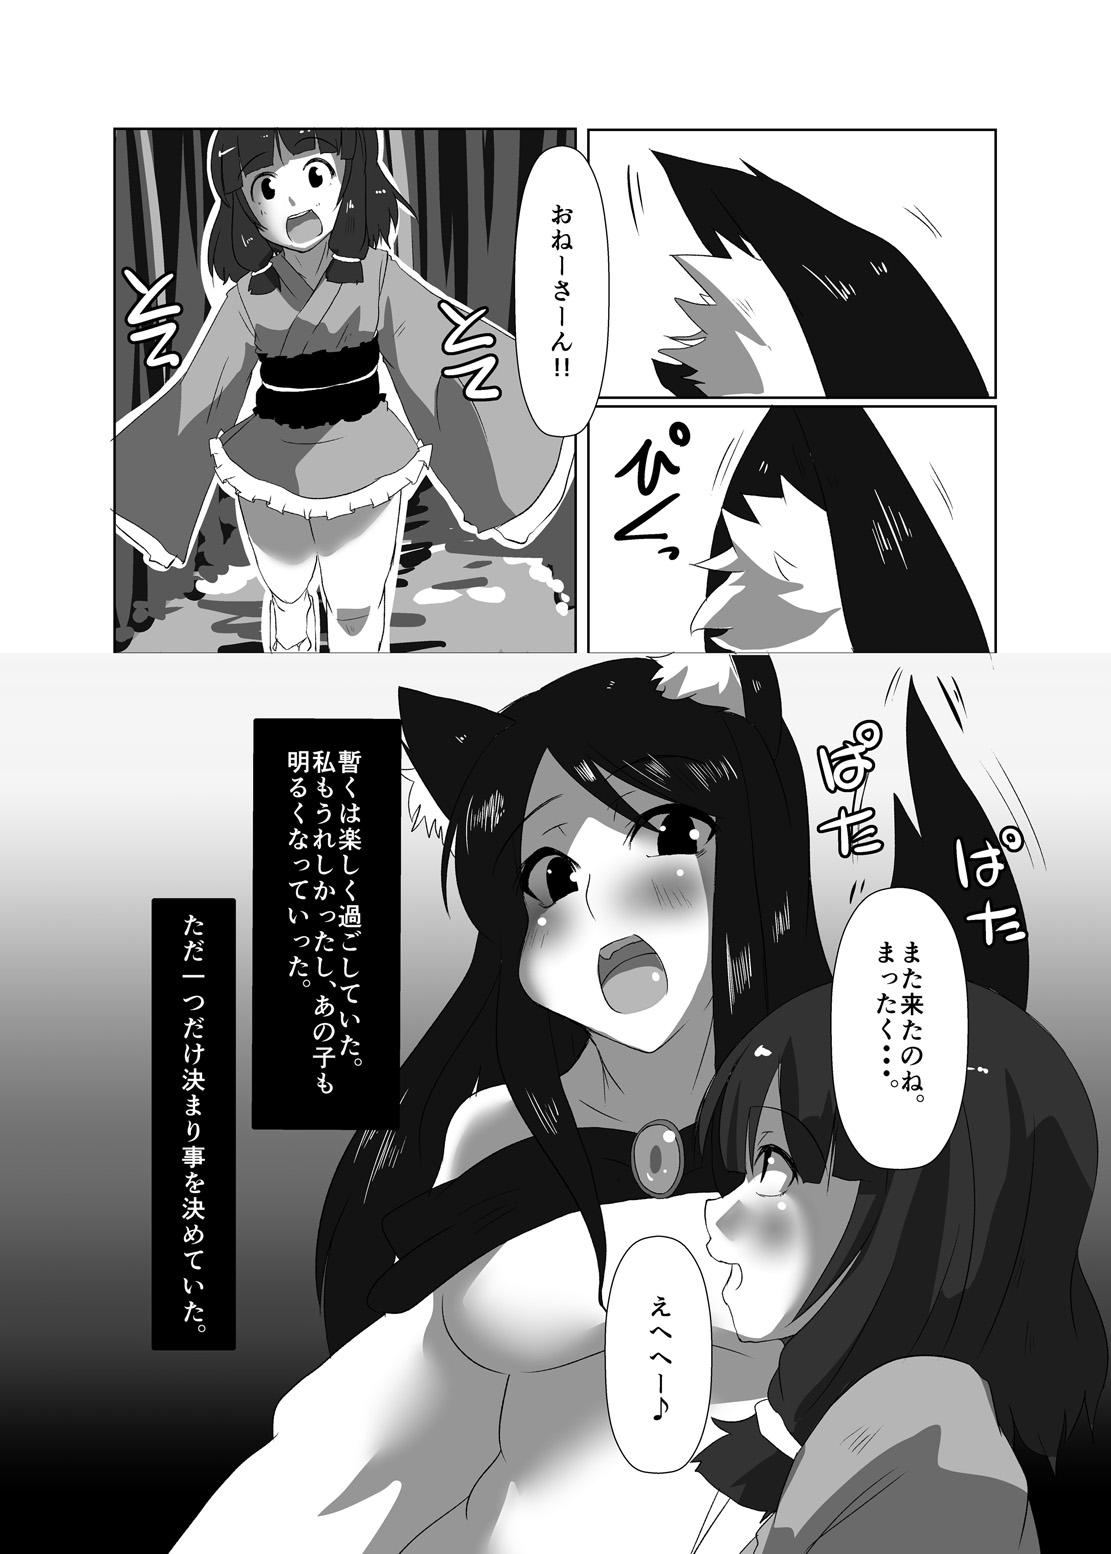 Wet ELonely Wolf no Onee-san - Touhou project Sweet - Page 12